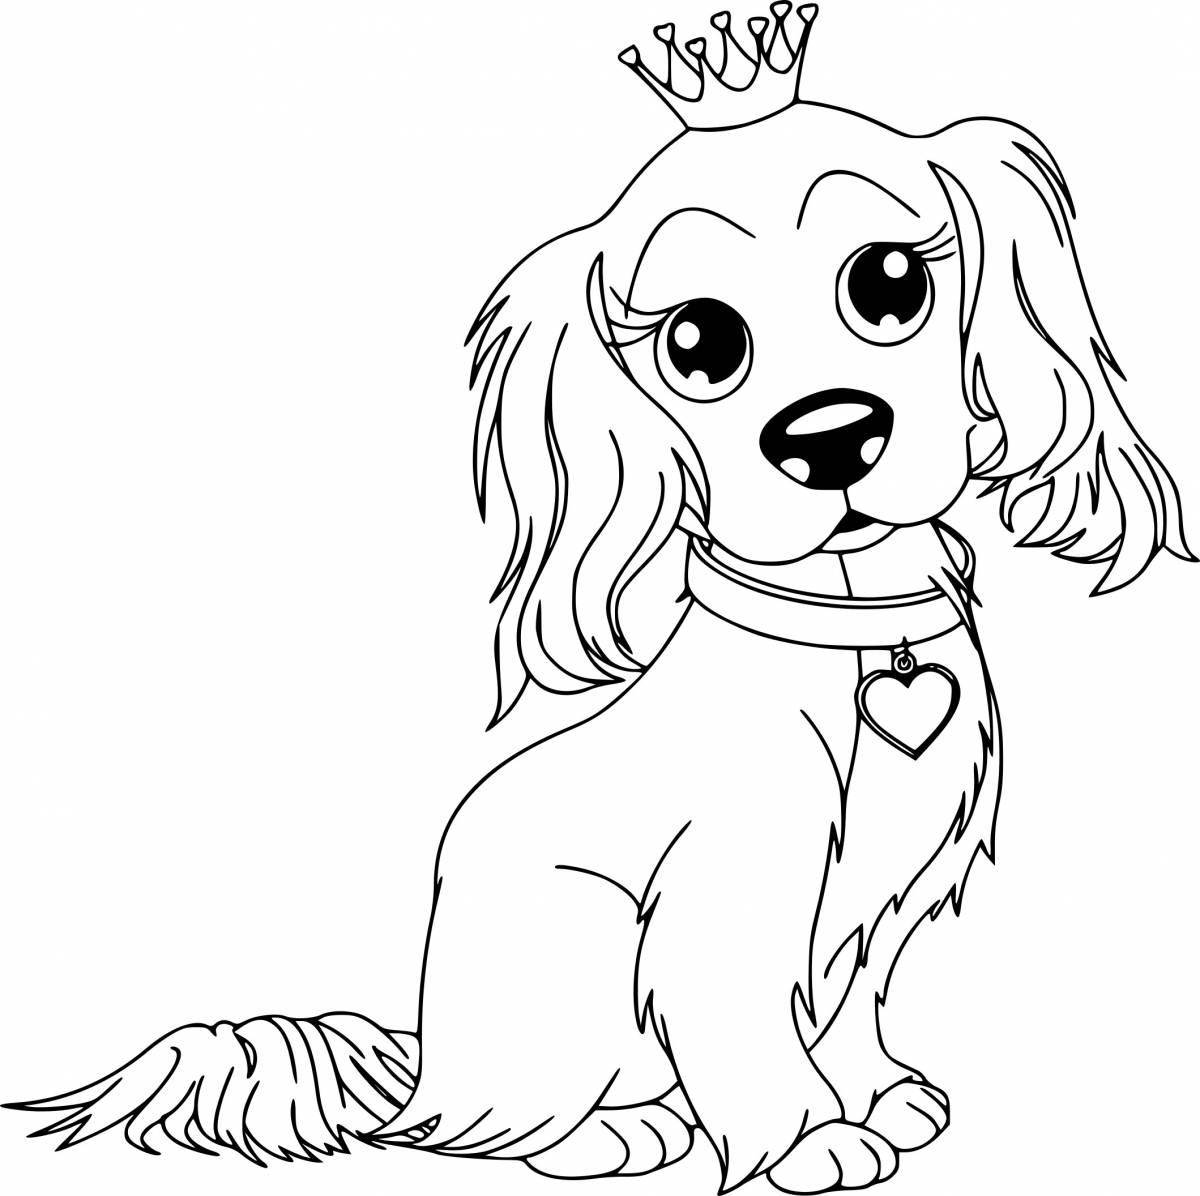 Favorite cute dog coloring pages for girls